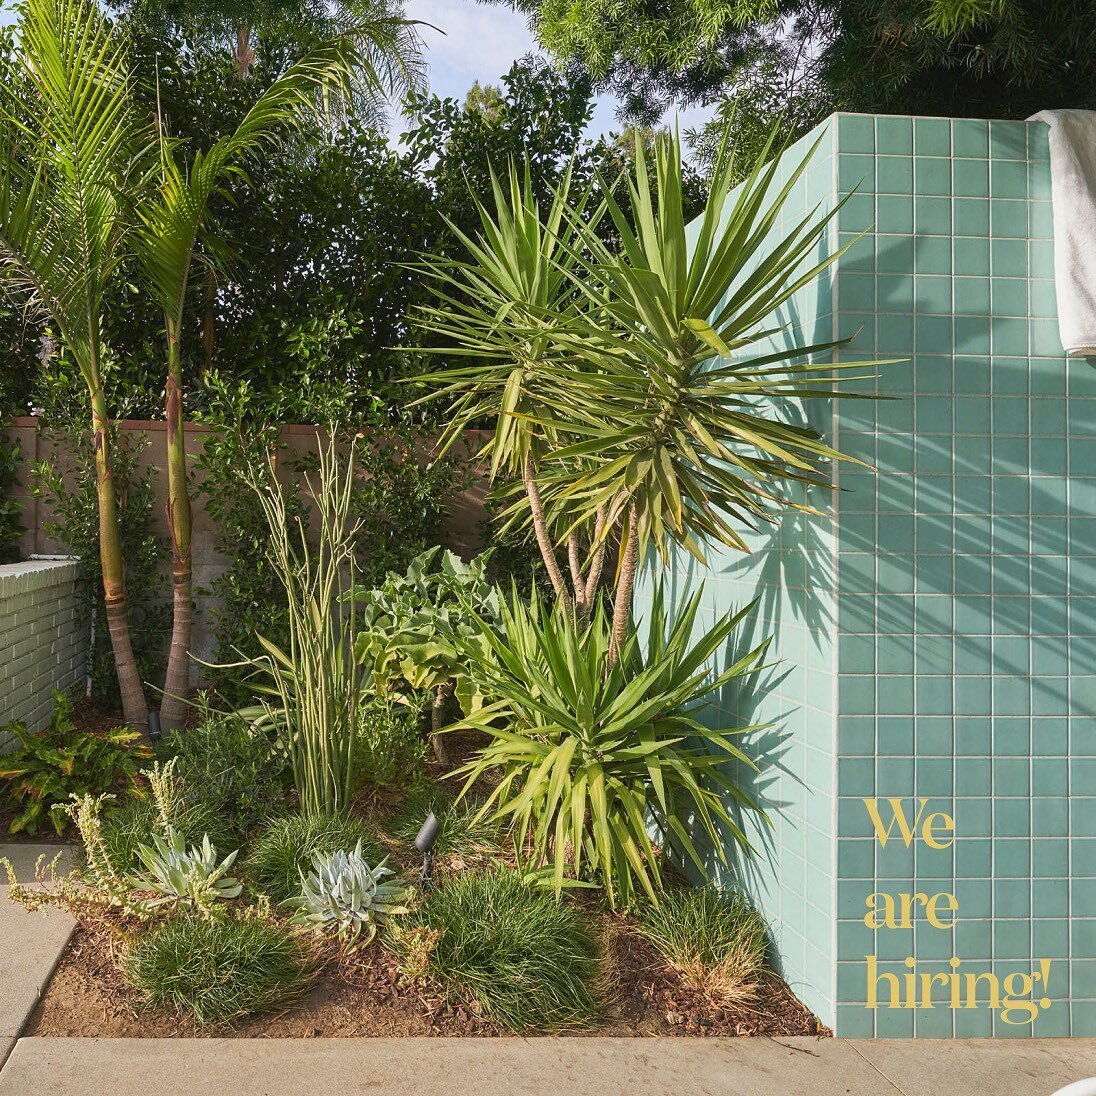 Nectar is looking for a new team member! Are you passionate about gardens, ecology, California native plants, and working with people to create their dream spaces to connect with nature? Are you someone who wants to be a part of a small office where 